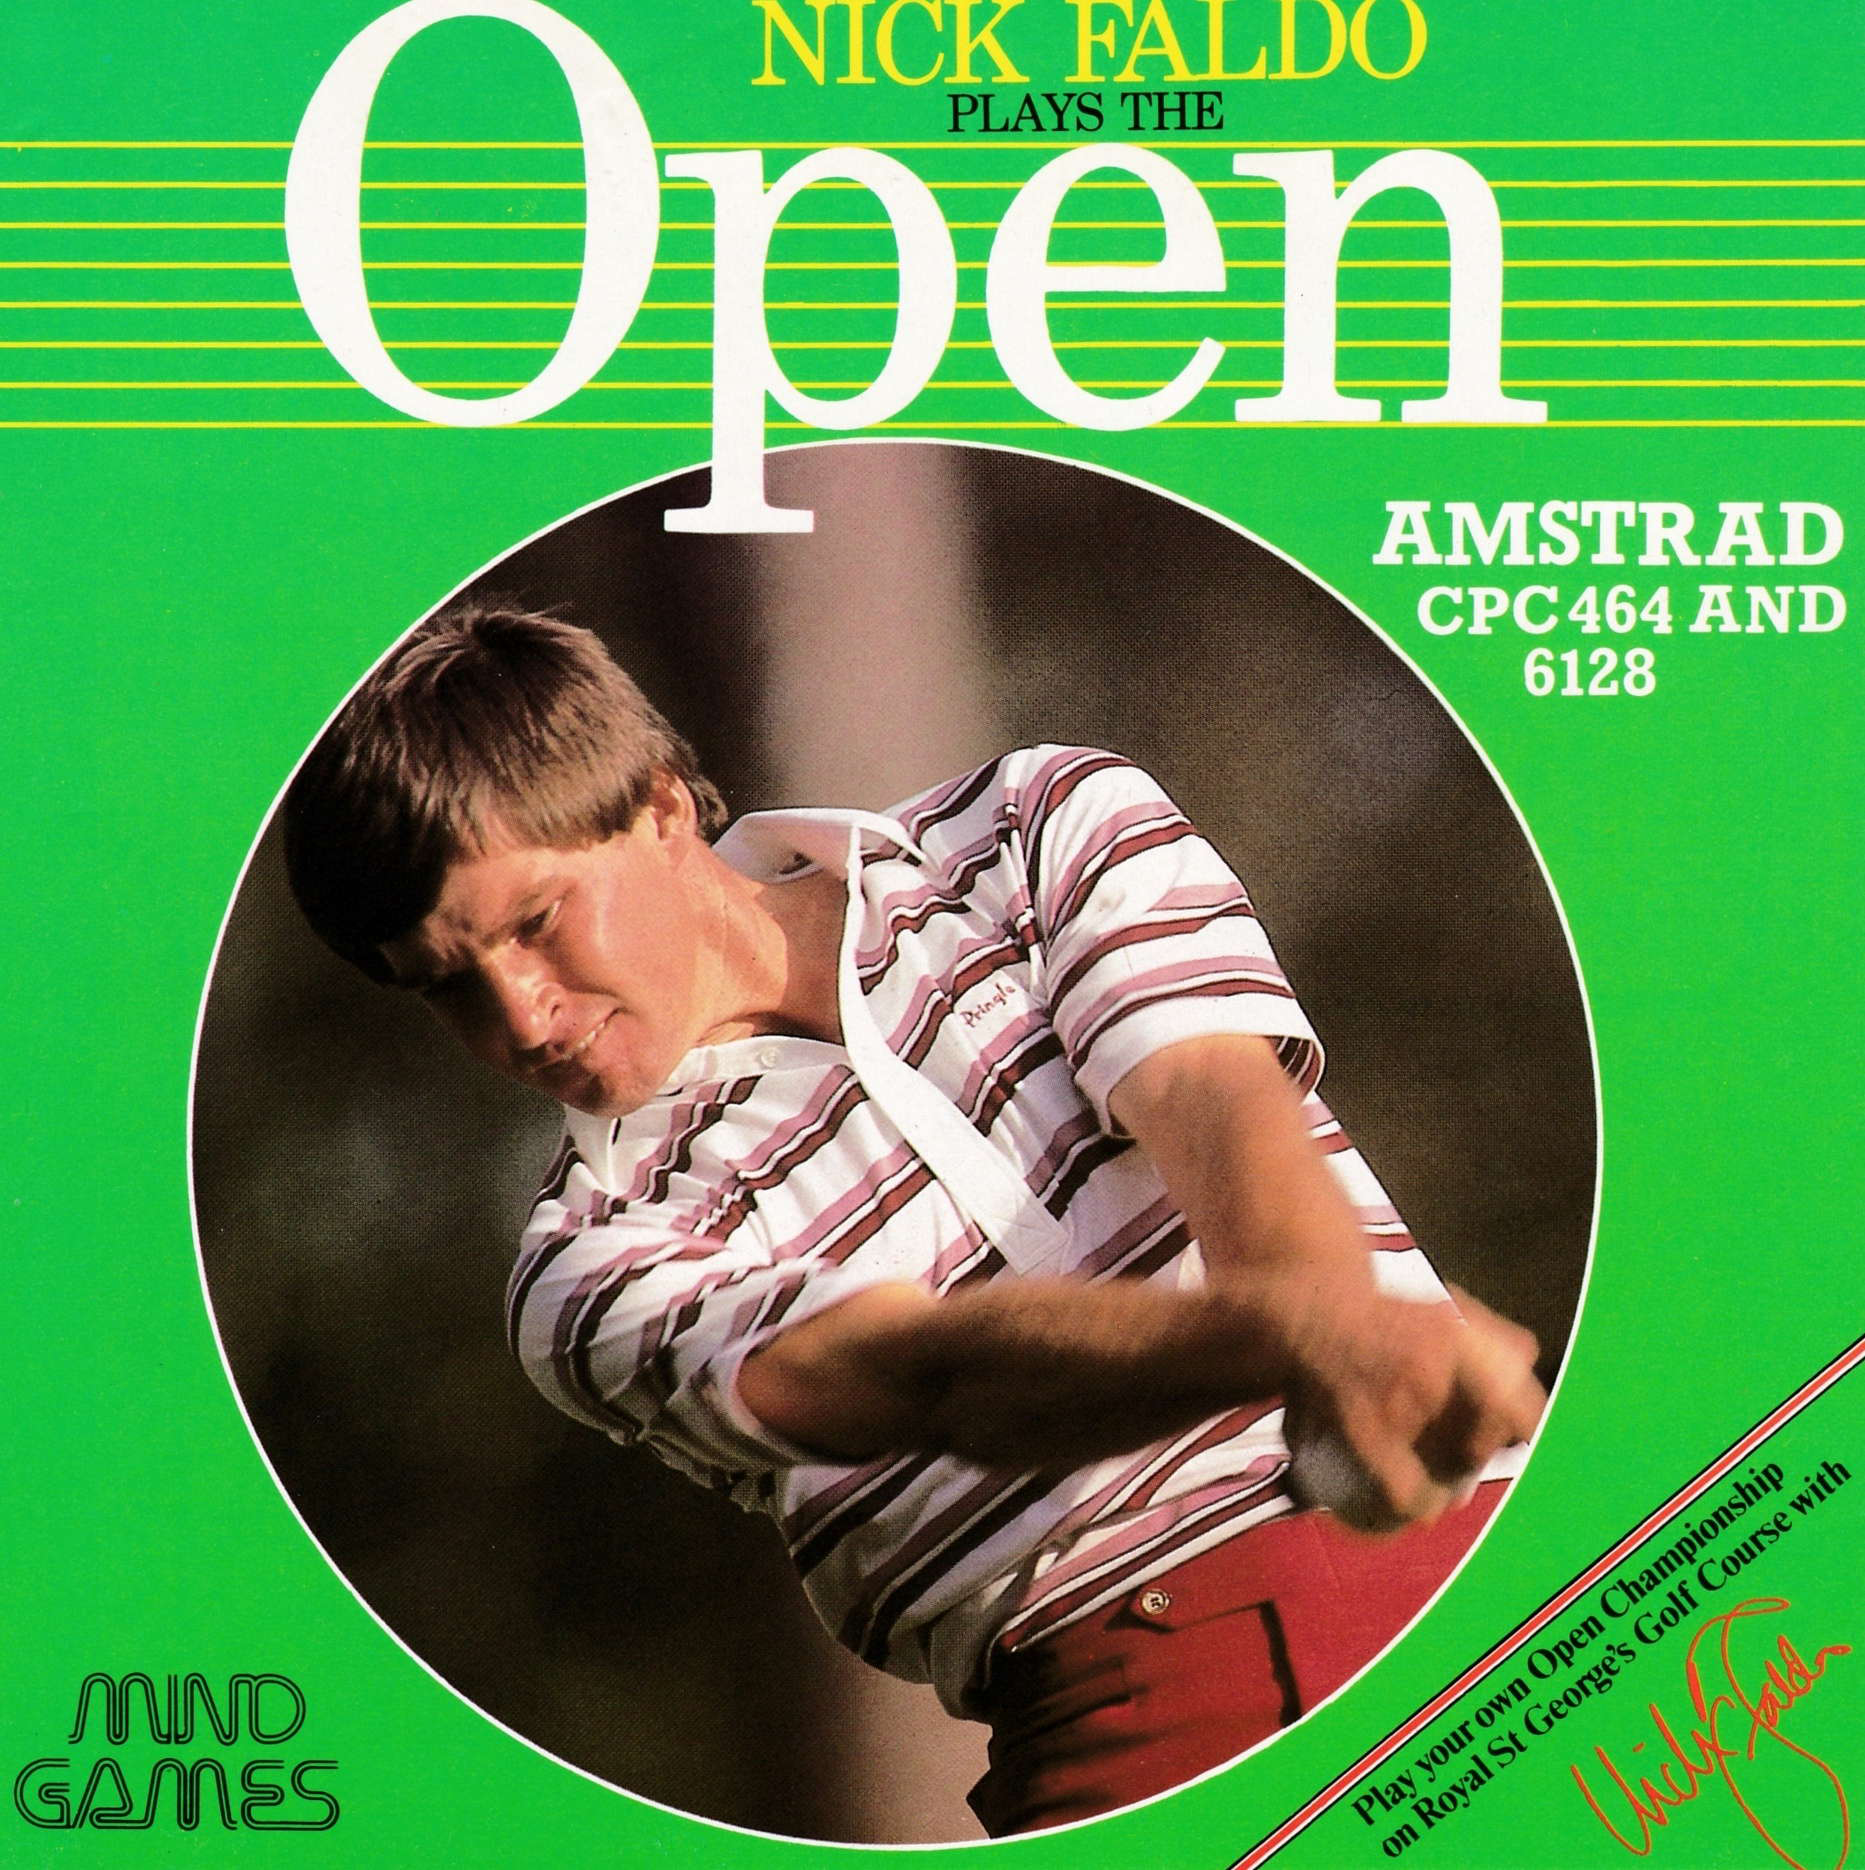 screenshot of the Amstrad CPC game Nick faldo plays the open by GameBase CPC